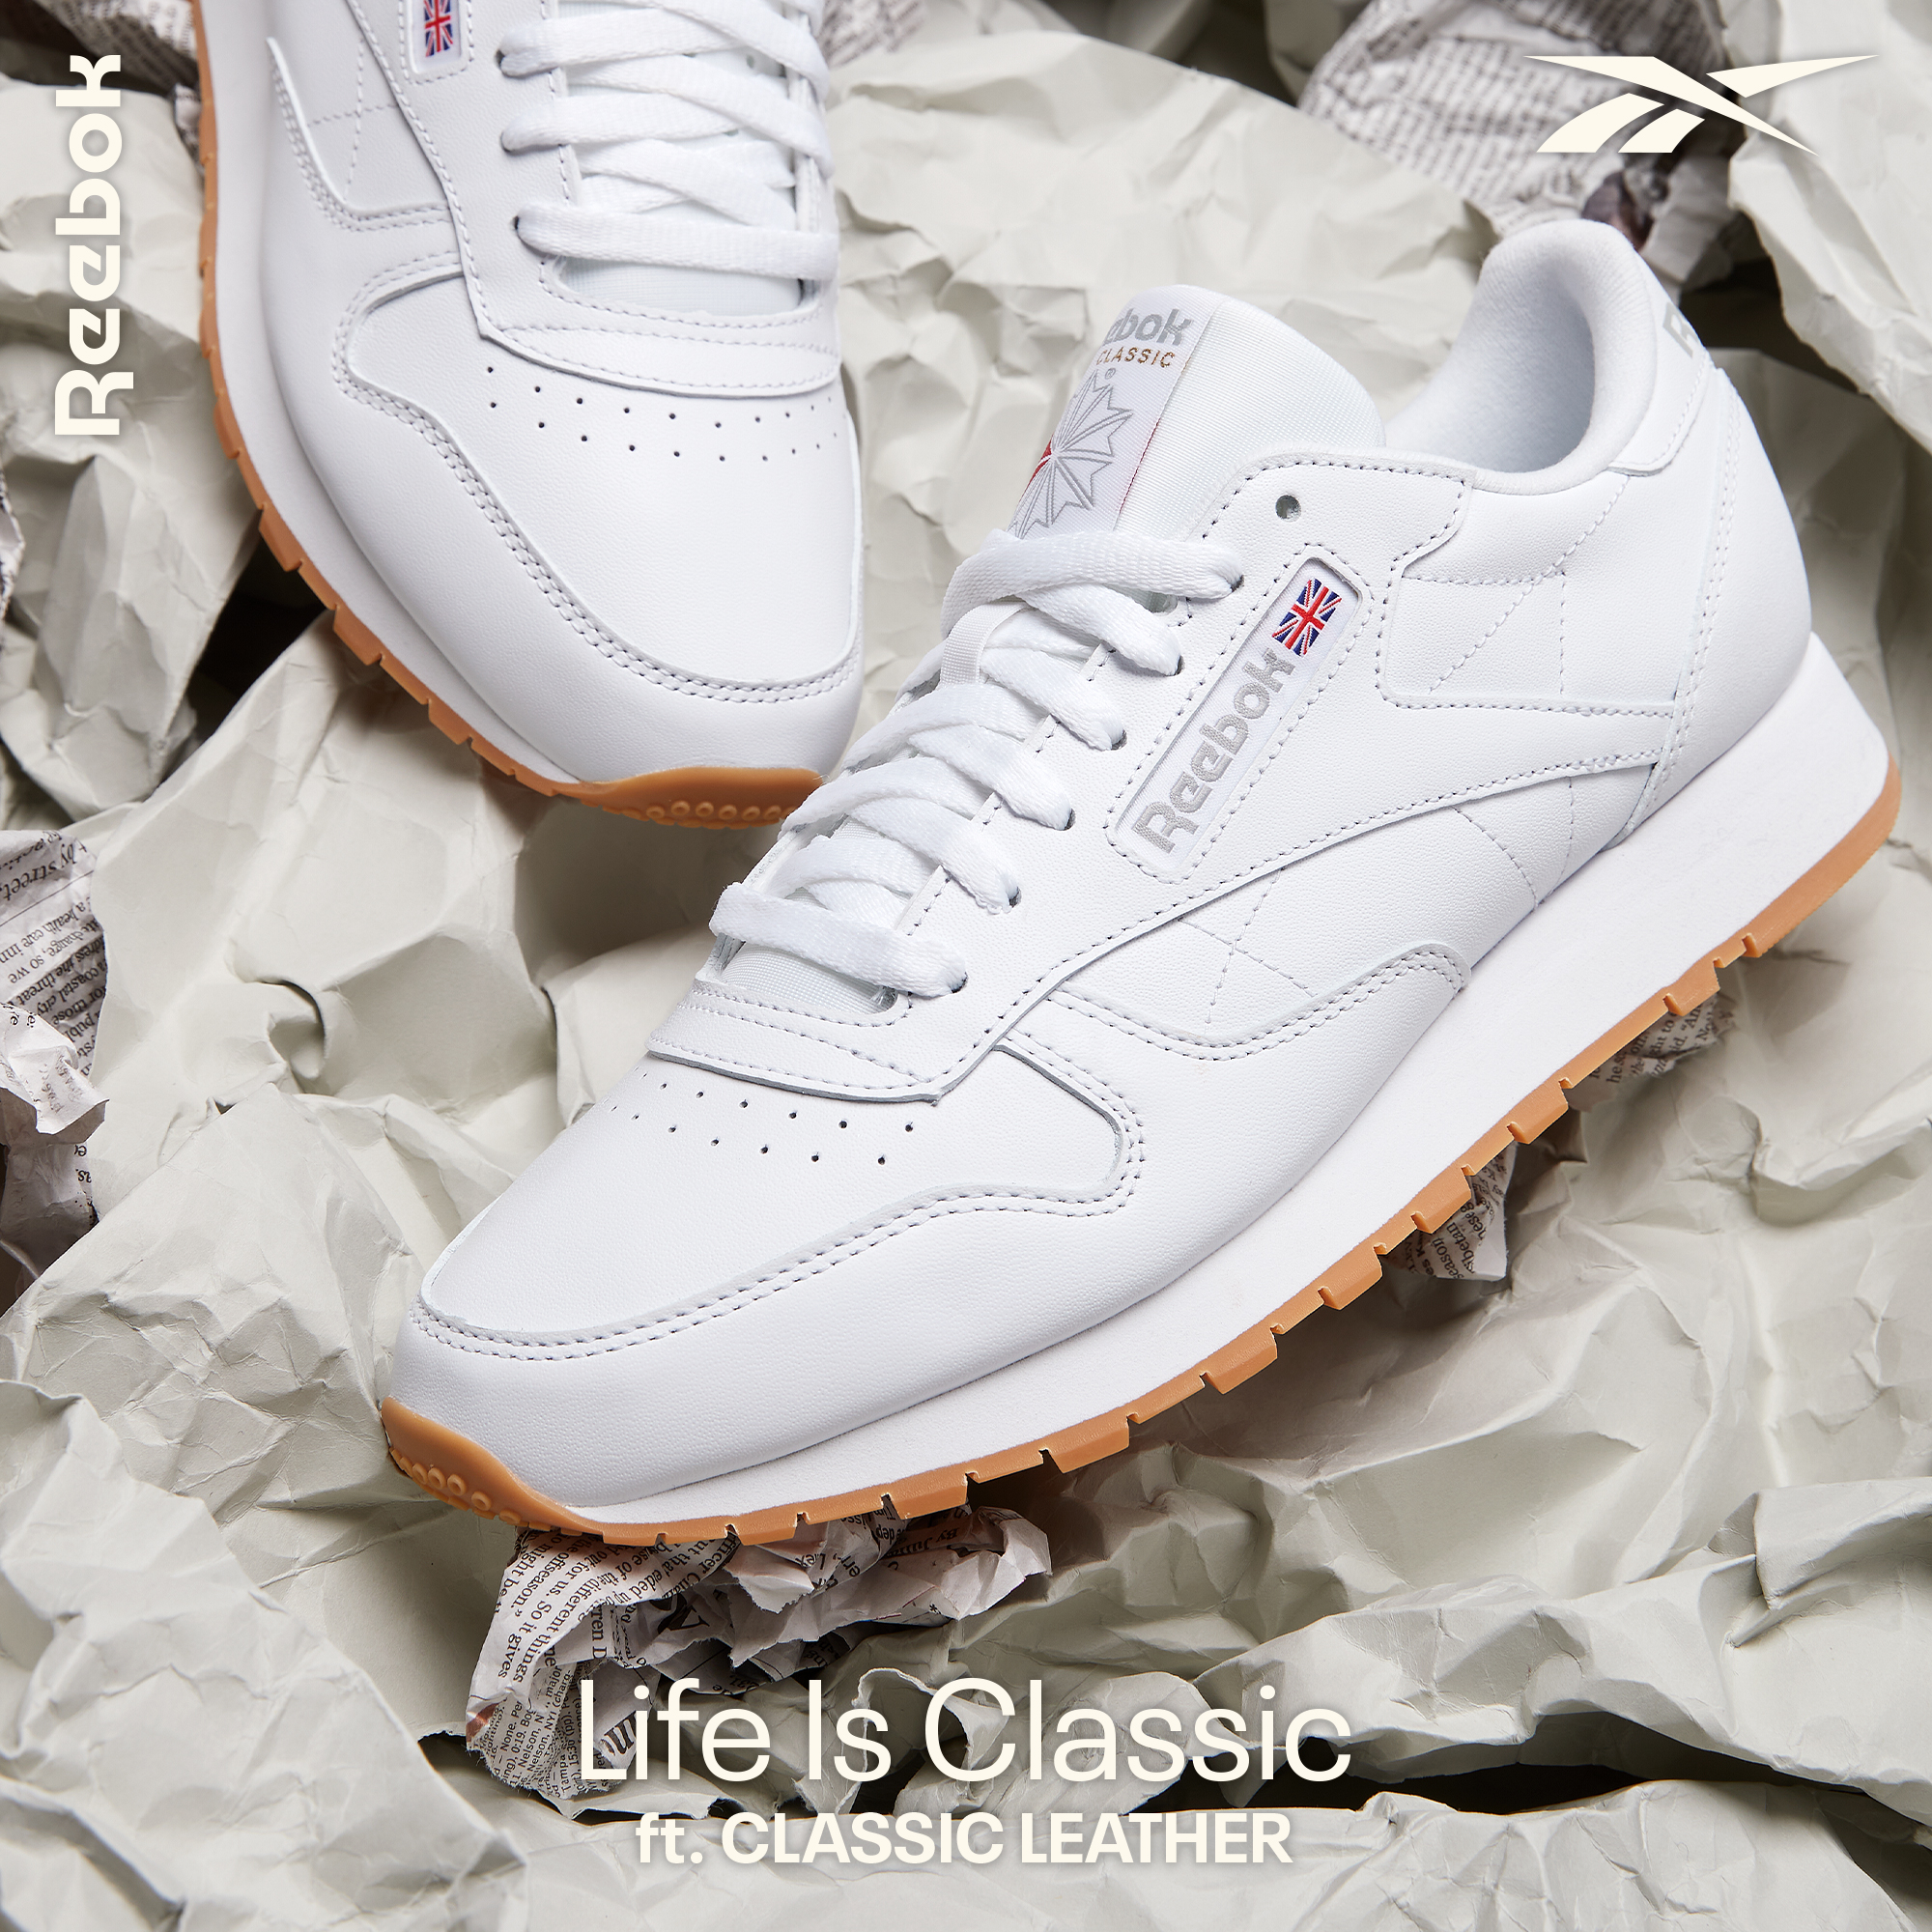 You thought Mayze made enough of a statement? The Mayze Stack takes it to a  whole new level, literally. Puma Mayze Stack White Sneaker i... | Instagram